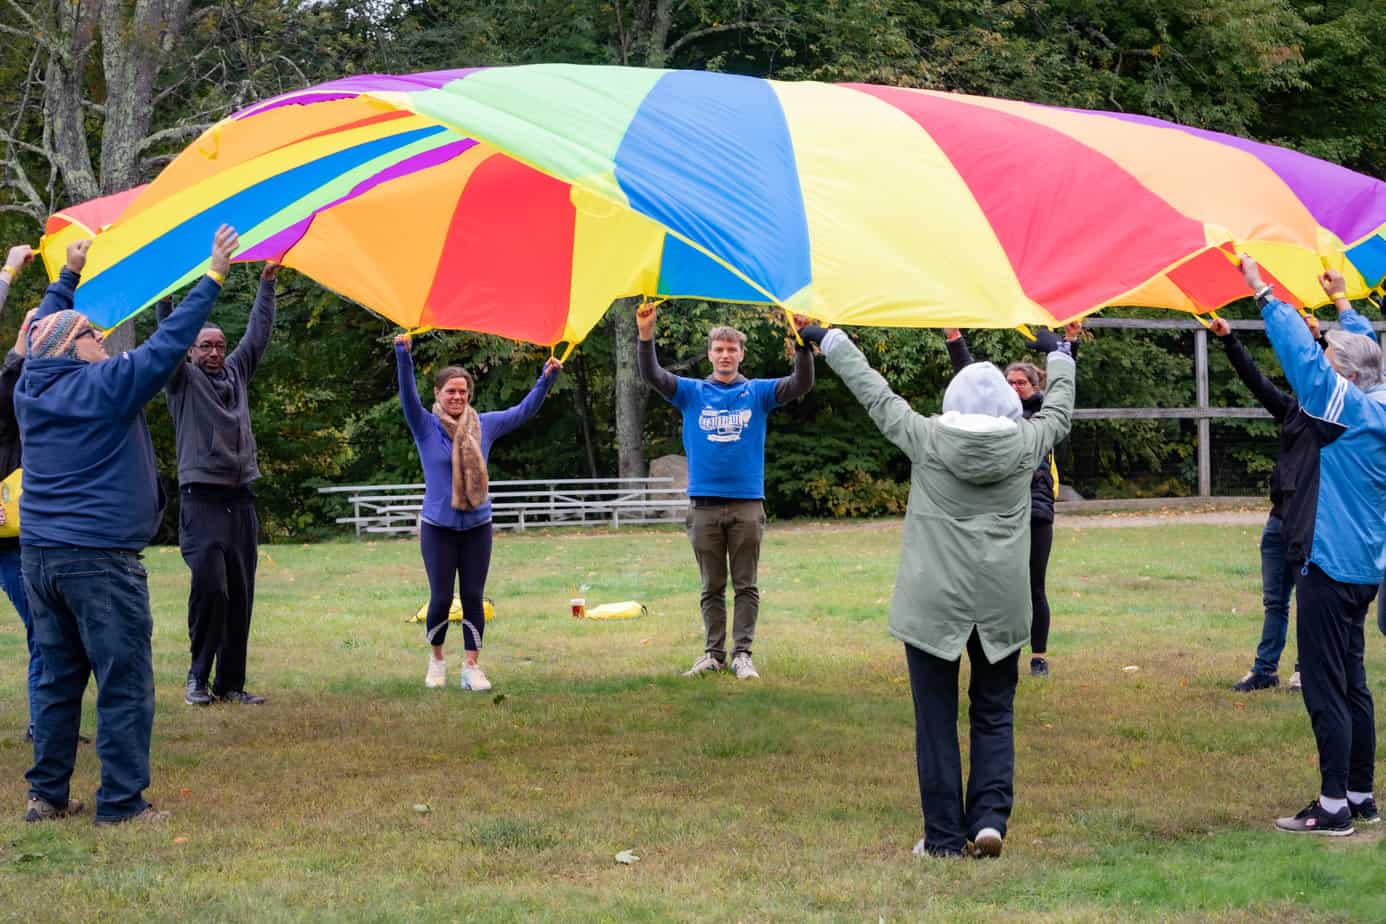 A group of people playing parachute lawn games at the Mountainside alumni reunion 2022.